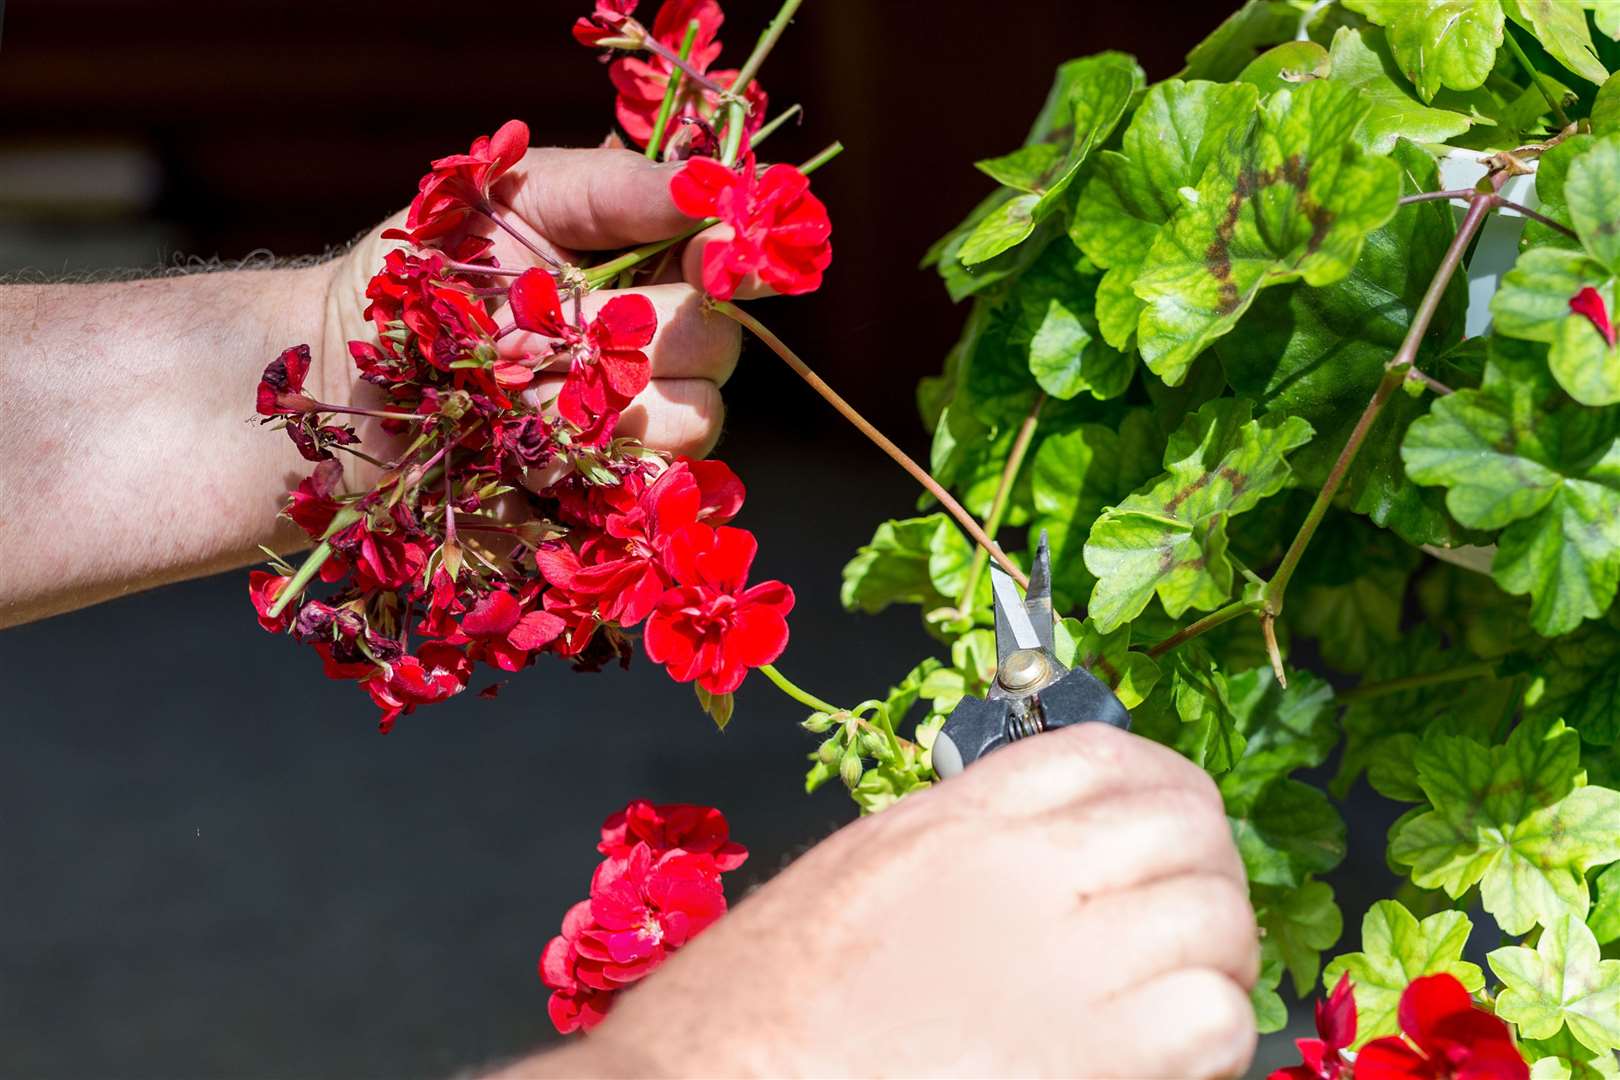 Trim dead flowers to help keep your borders looking fresh and lively. Picture: iStock/PA